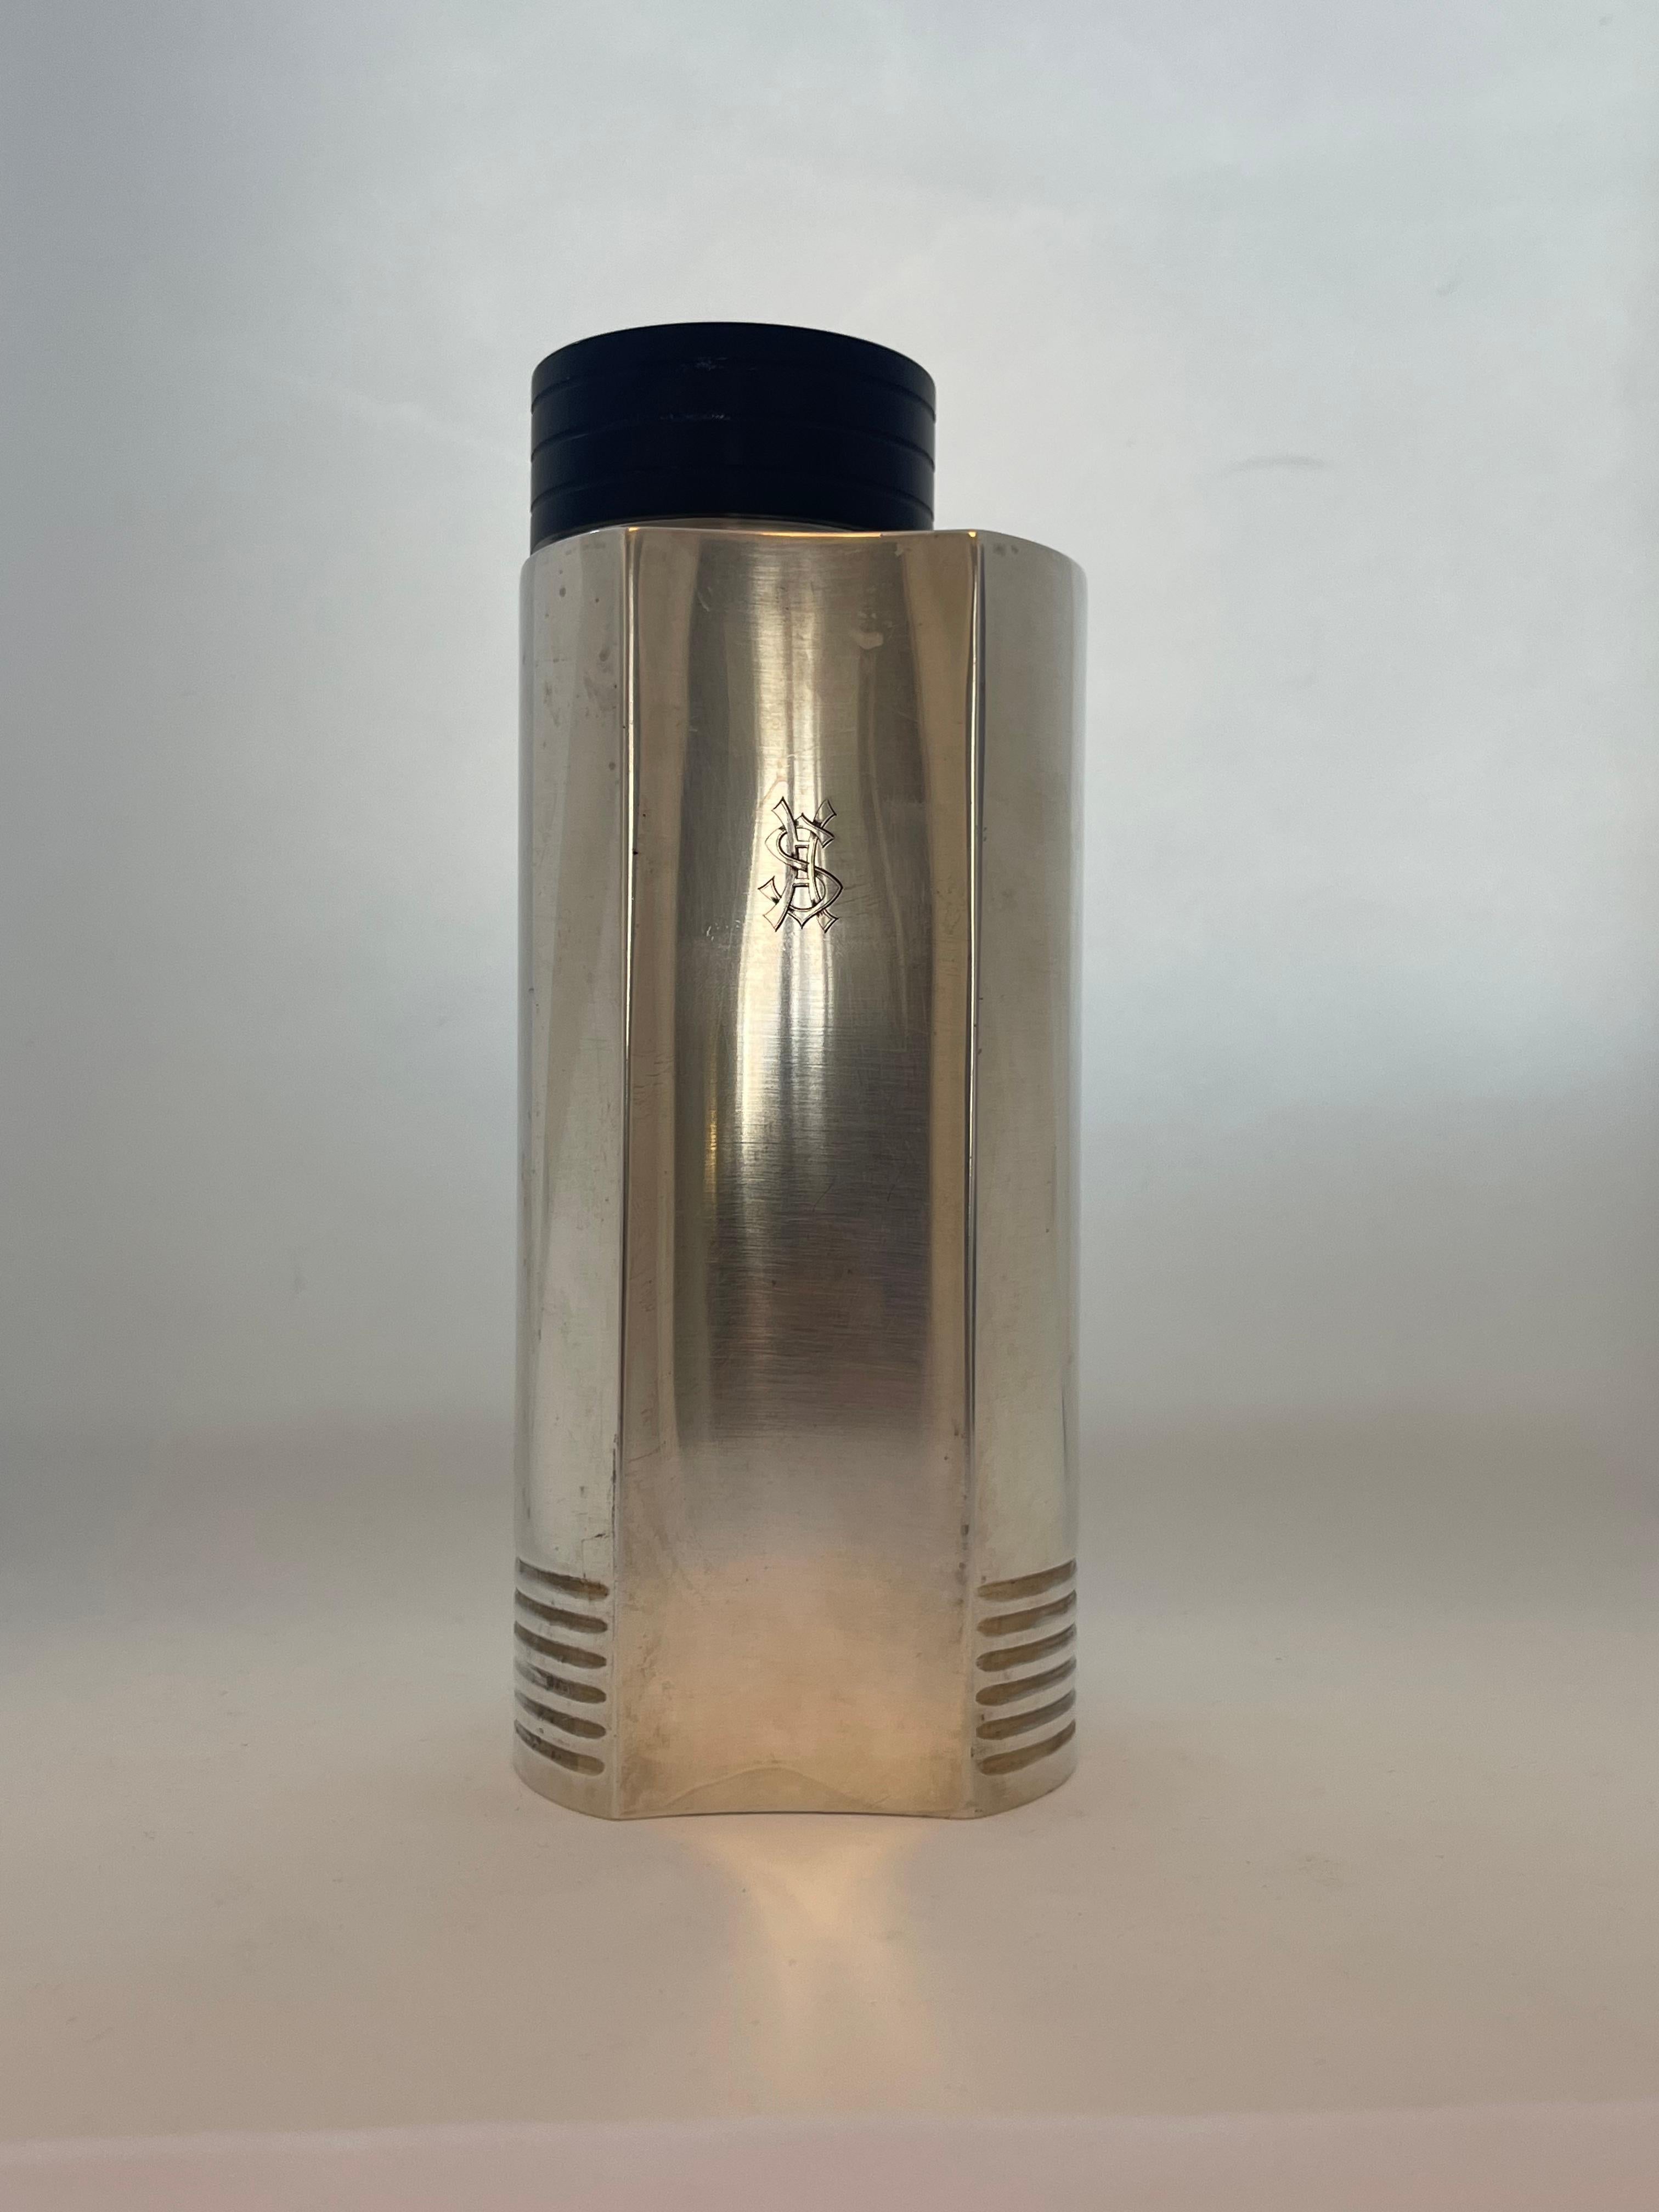 Cocktail Shaker by Folke Arstrom Silver Plated for Gab Sweden, 1930 For Sale 5